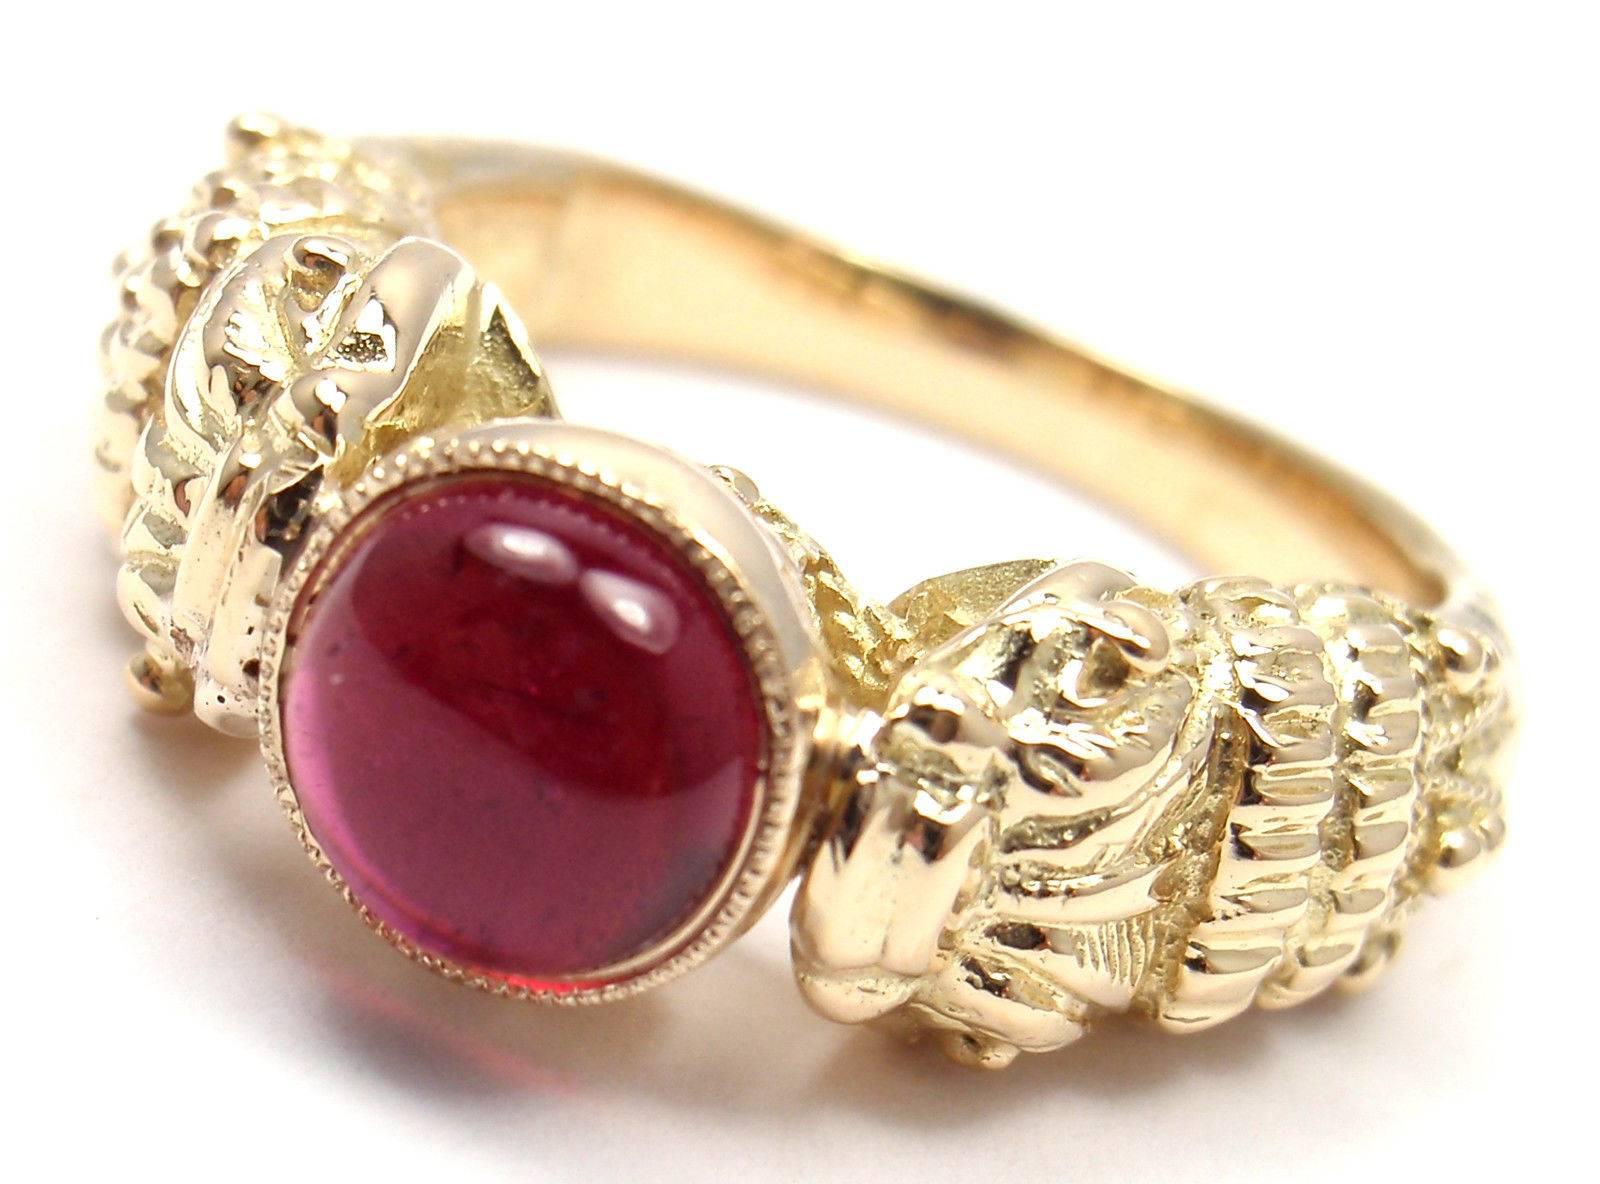 18k Yellow Gold Pink Tourmaline Band Ring by Zolotas. 
Details: 
Size: 5.5
Weight: 10.6 grams
Width: 7mm
Stamped Hallmarks: Zolotas 750
*Free Shipping within the United States*
Your Price: $2,900

T997mded